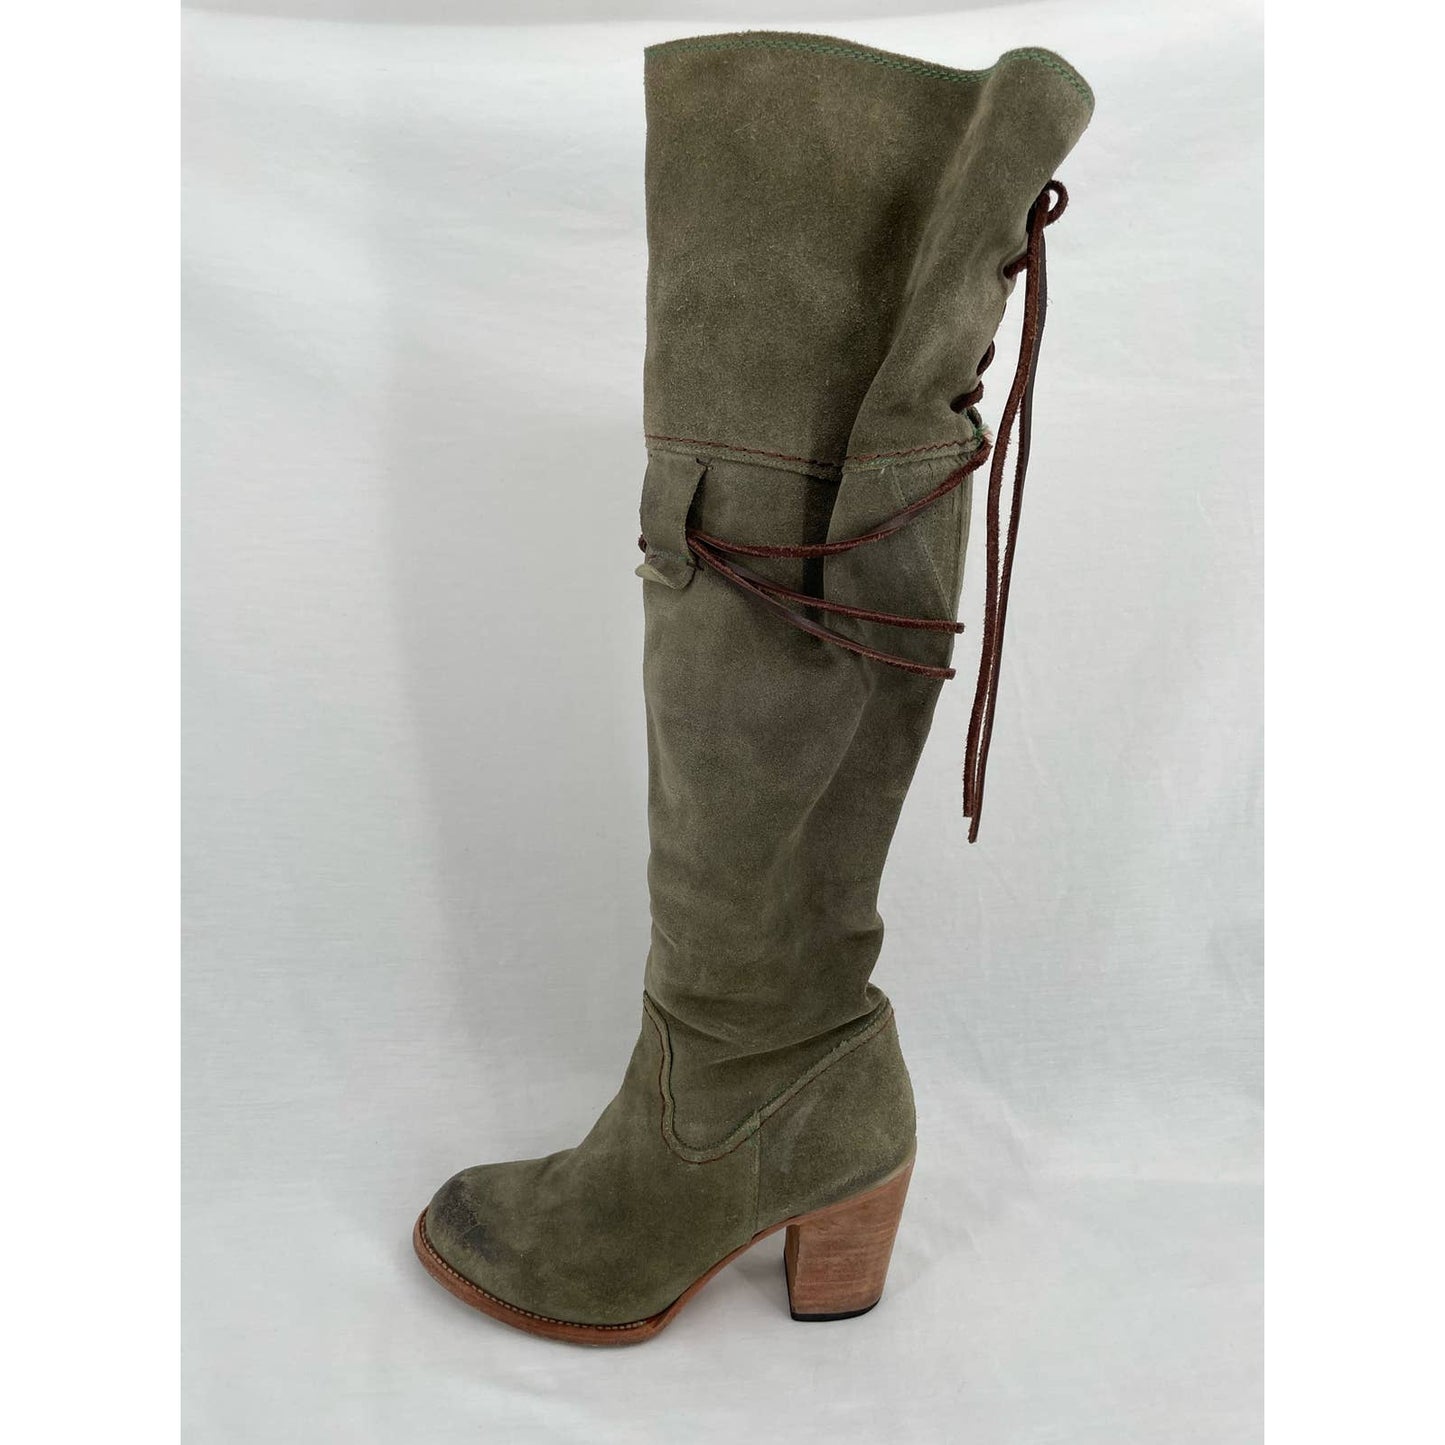 Freebird by Steven Brock Olive Green Suede Tall Leather OTK Heeled Lace Boots Size 10